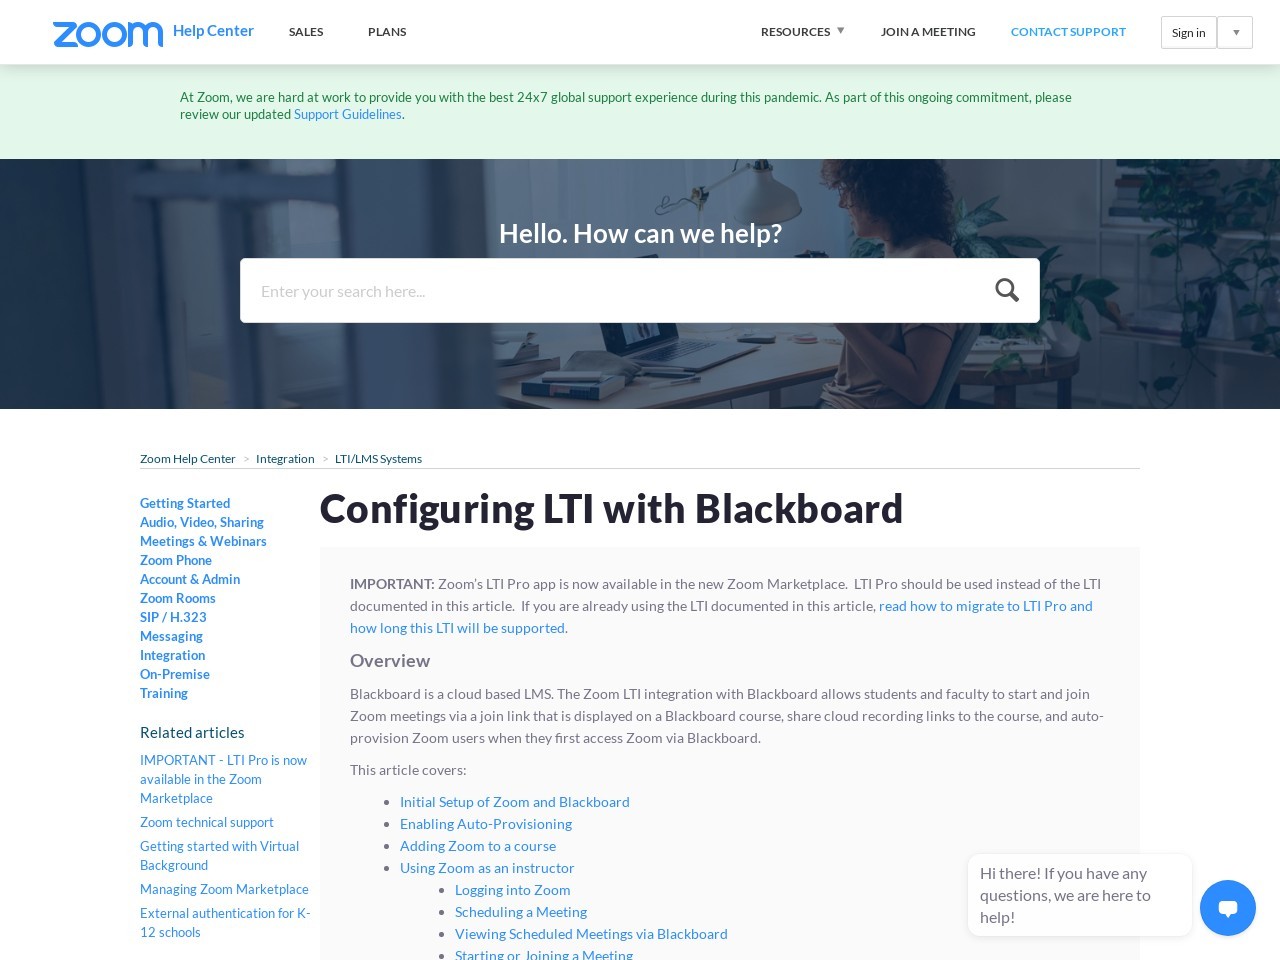 Configuring LTI with Blackboard – Zoom Help Center